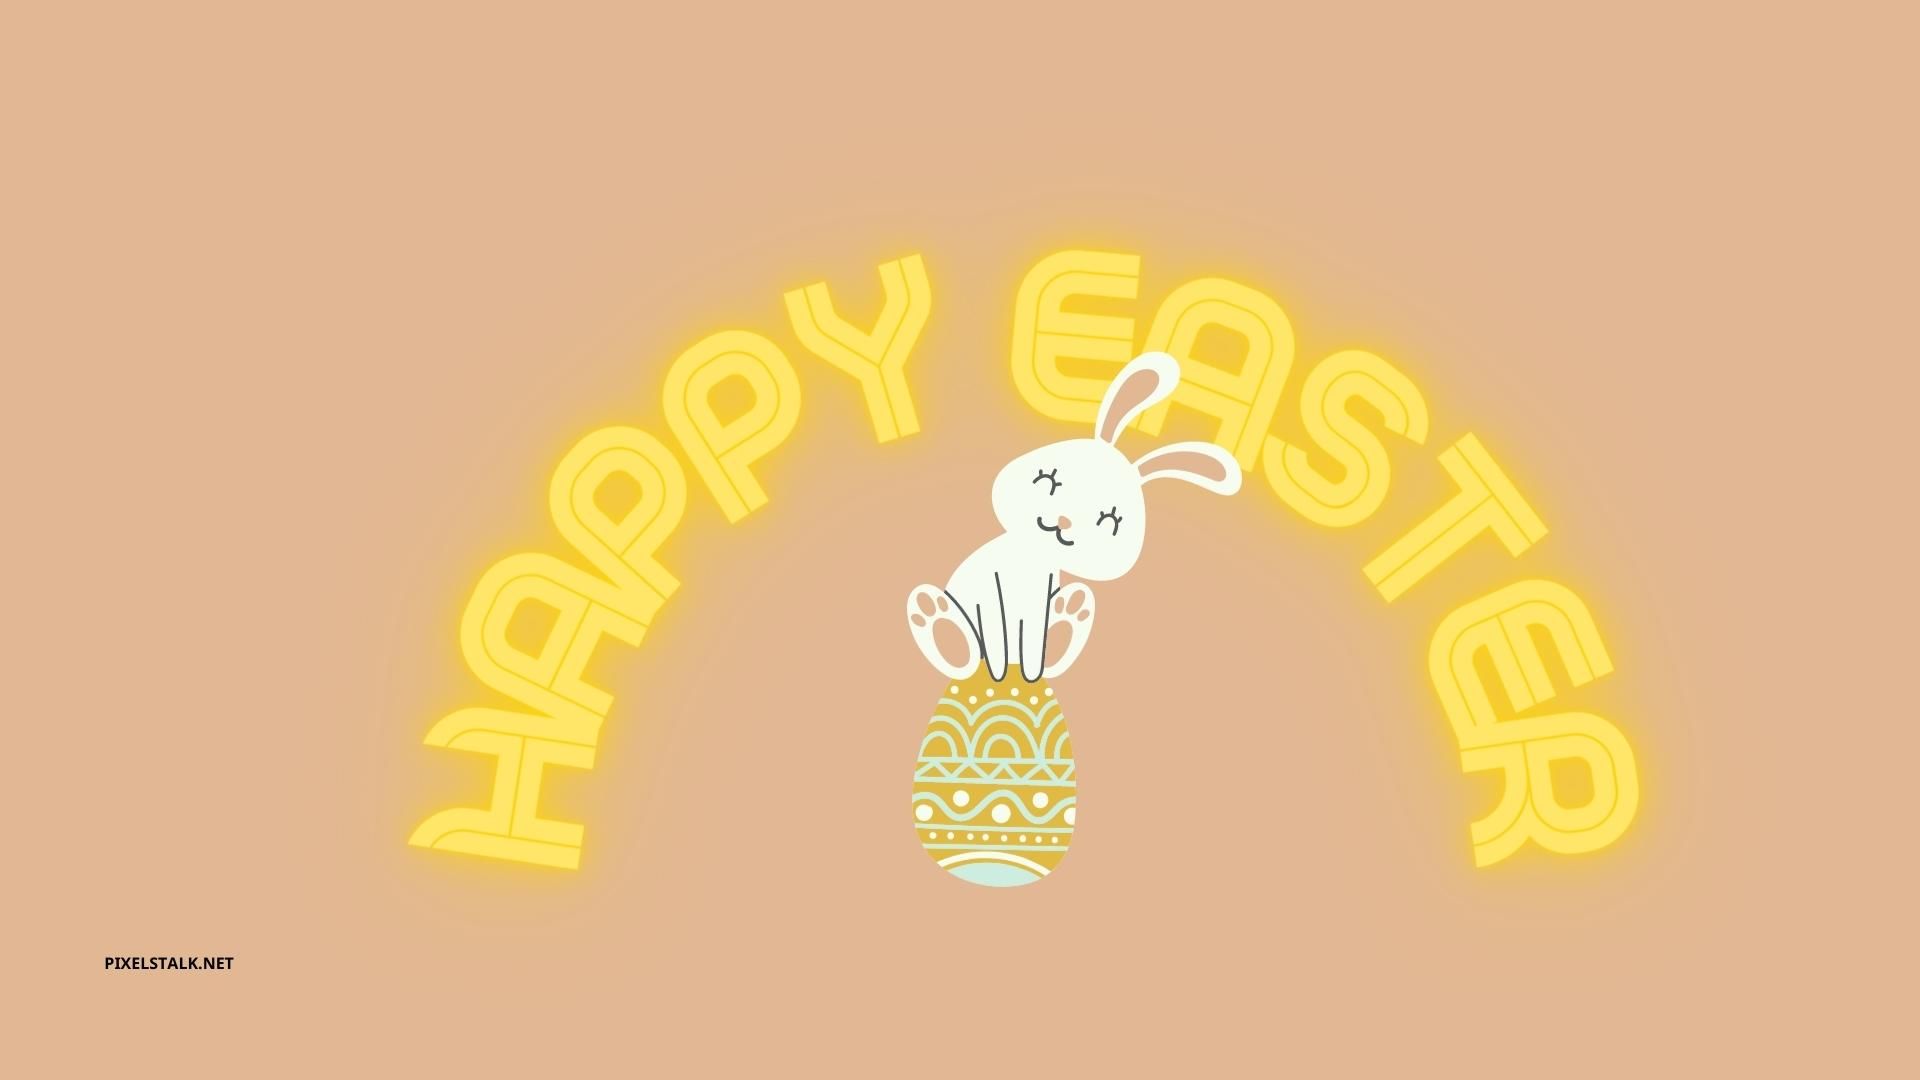 Happy Easter wallpaper with a cute bunny sitting on an egg - Easter